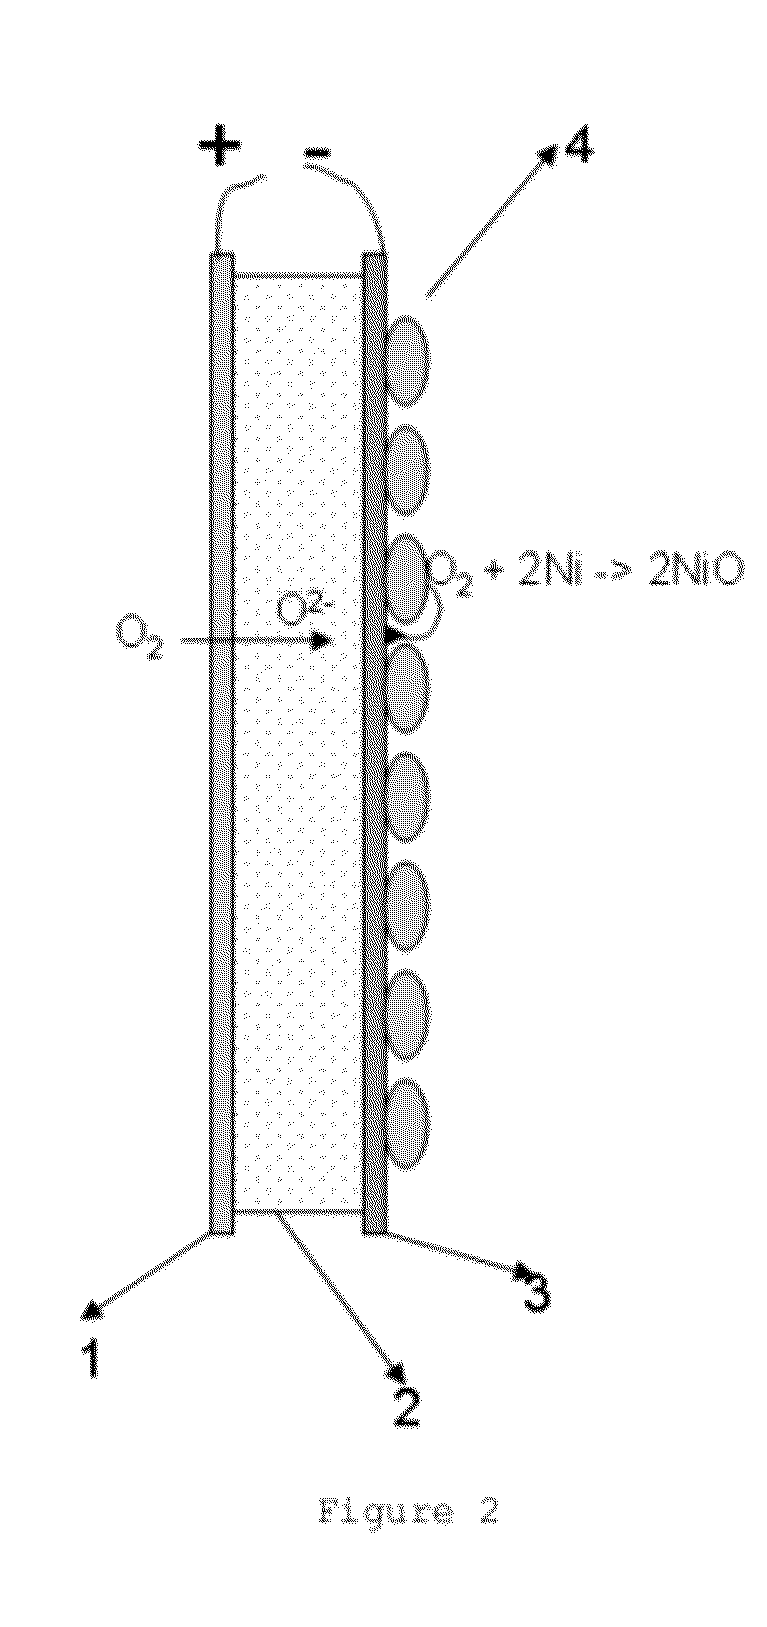 Hydrogen or oxygen electrochemical pumping catalytic membrane reactor and its applications